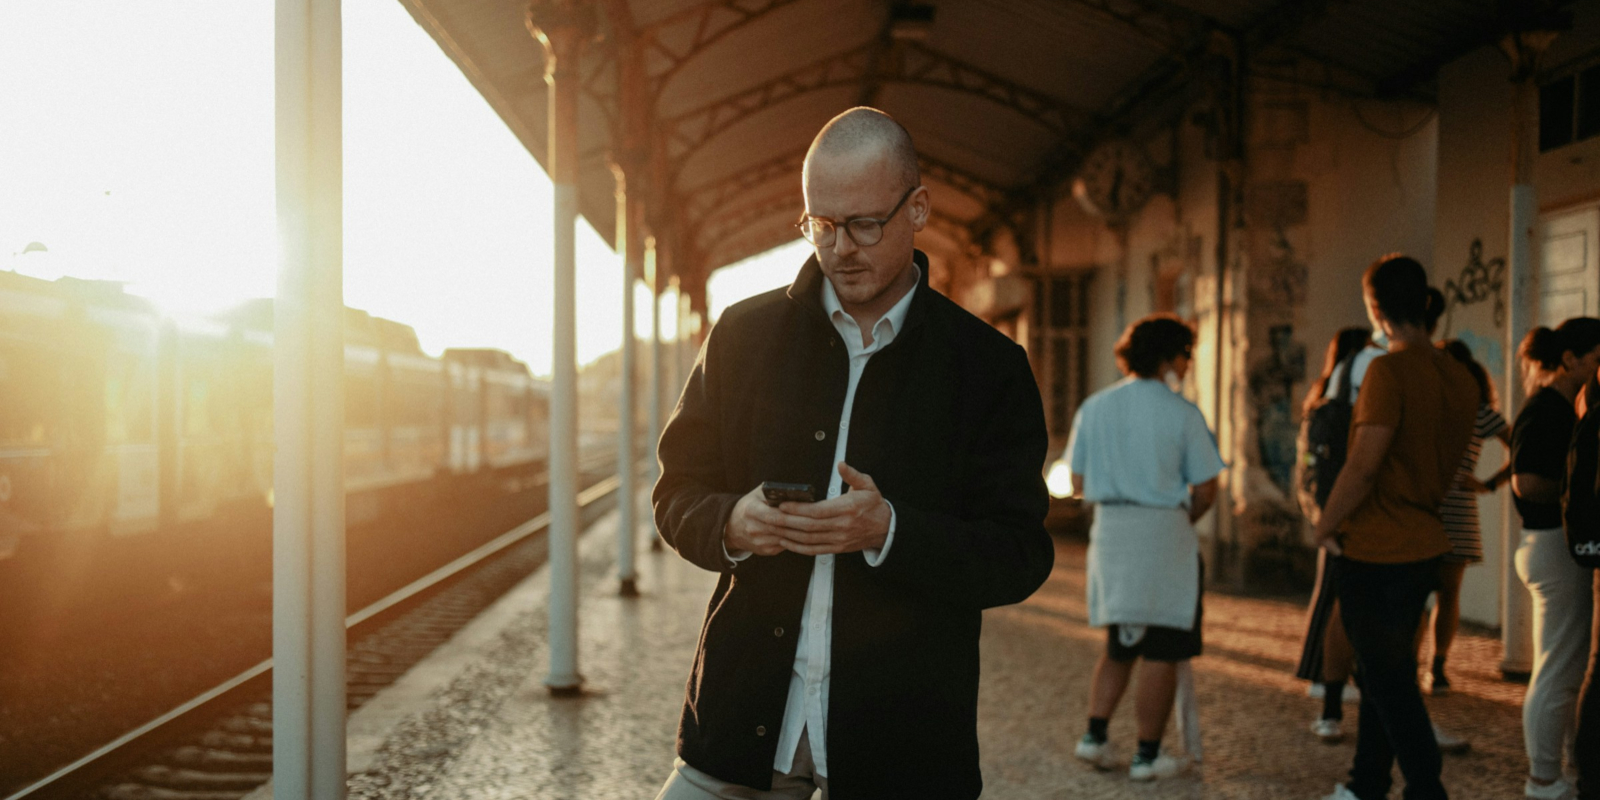 A shaven-headed man looking at his phone in a train station